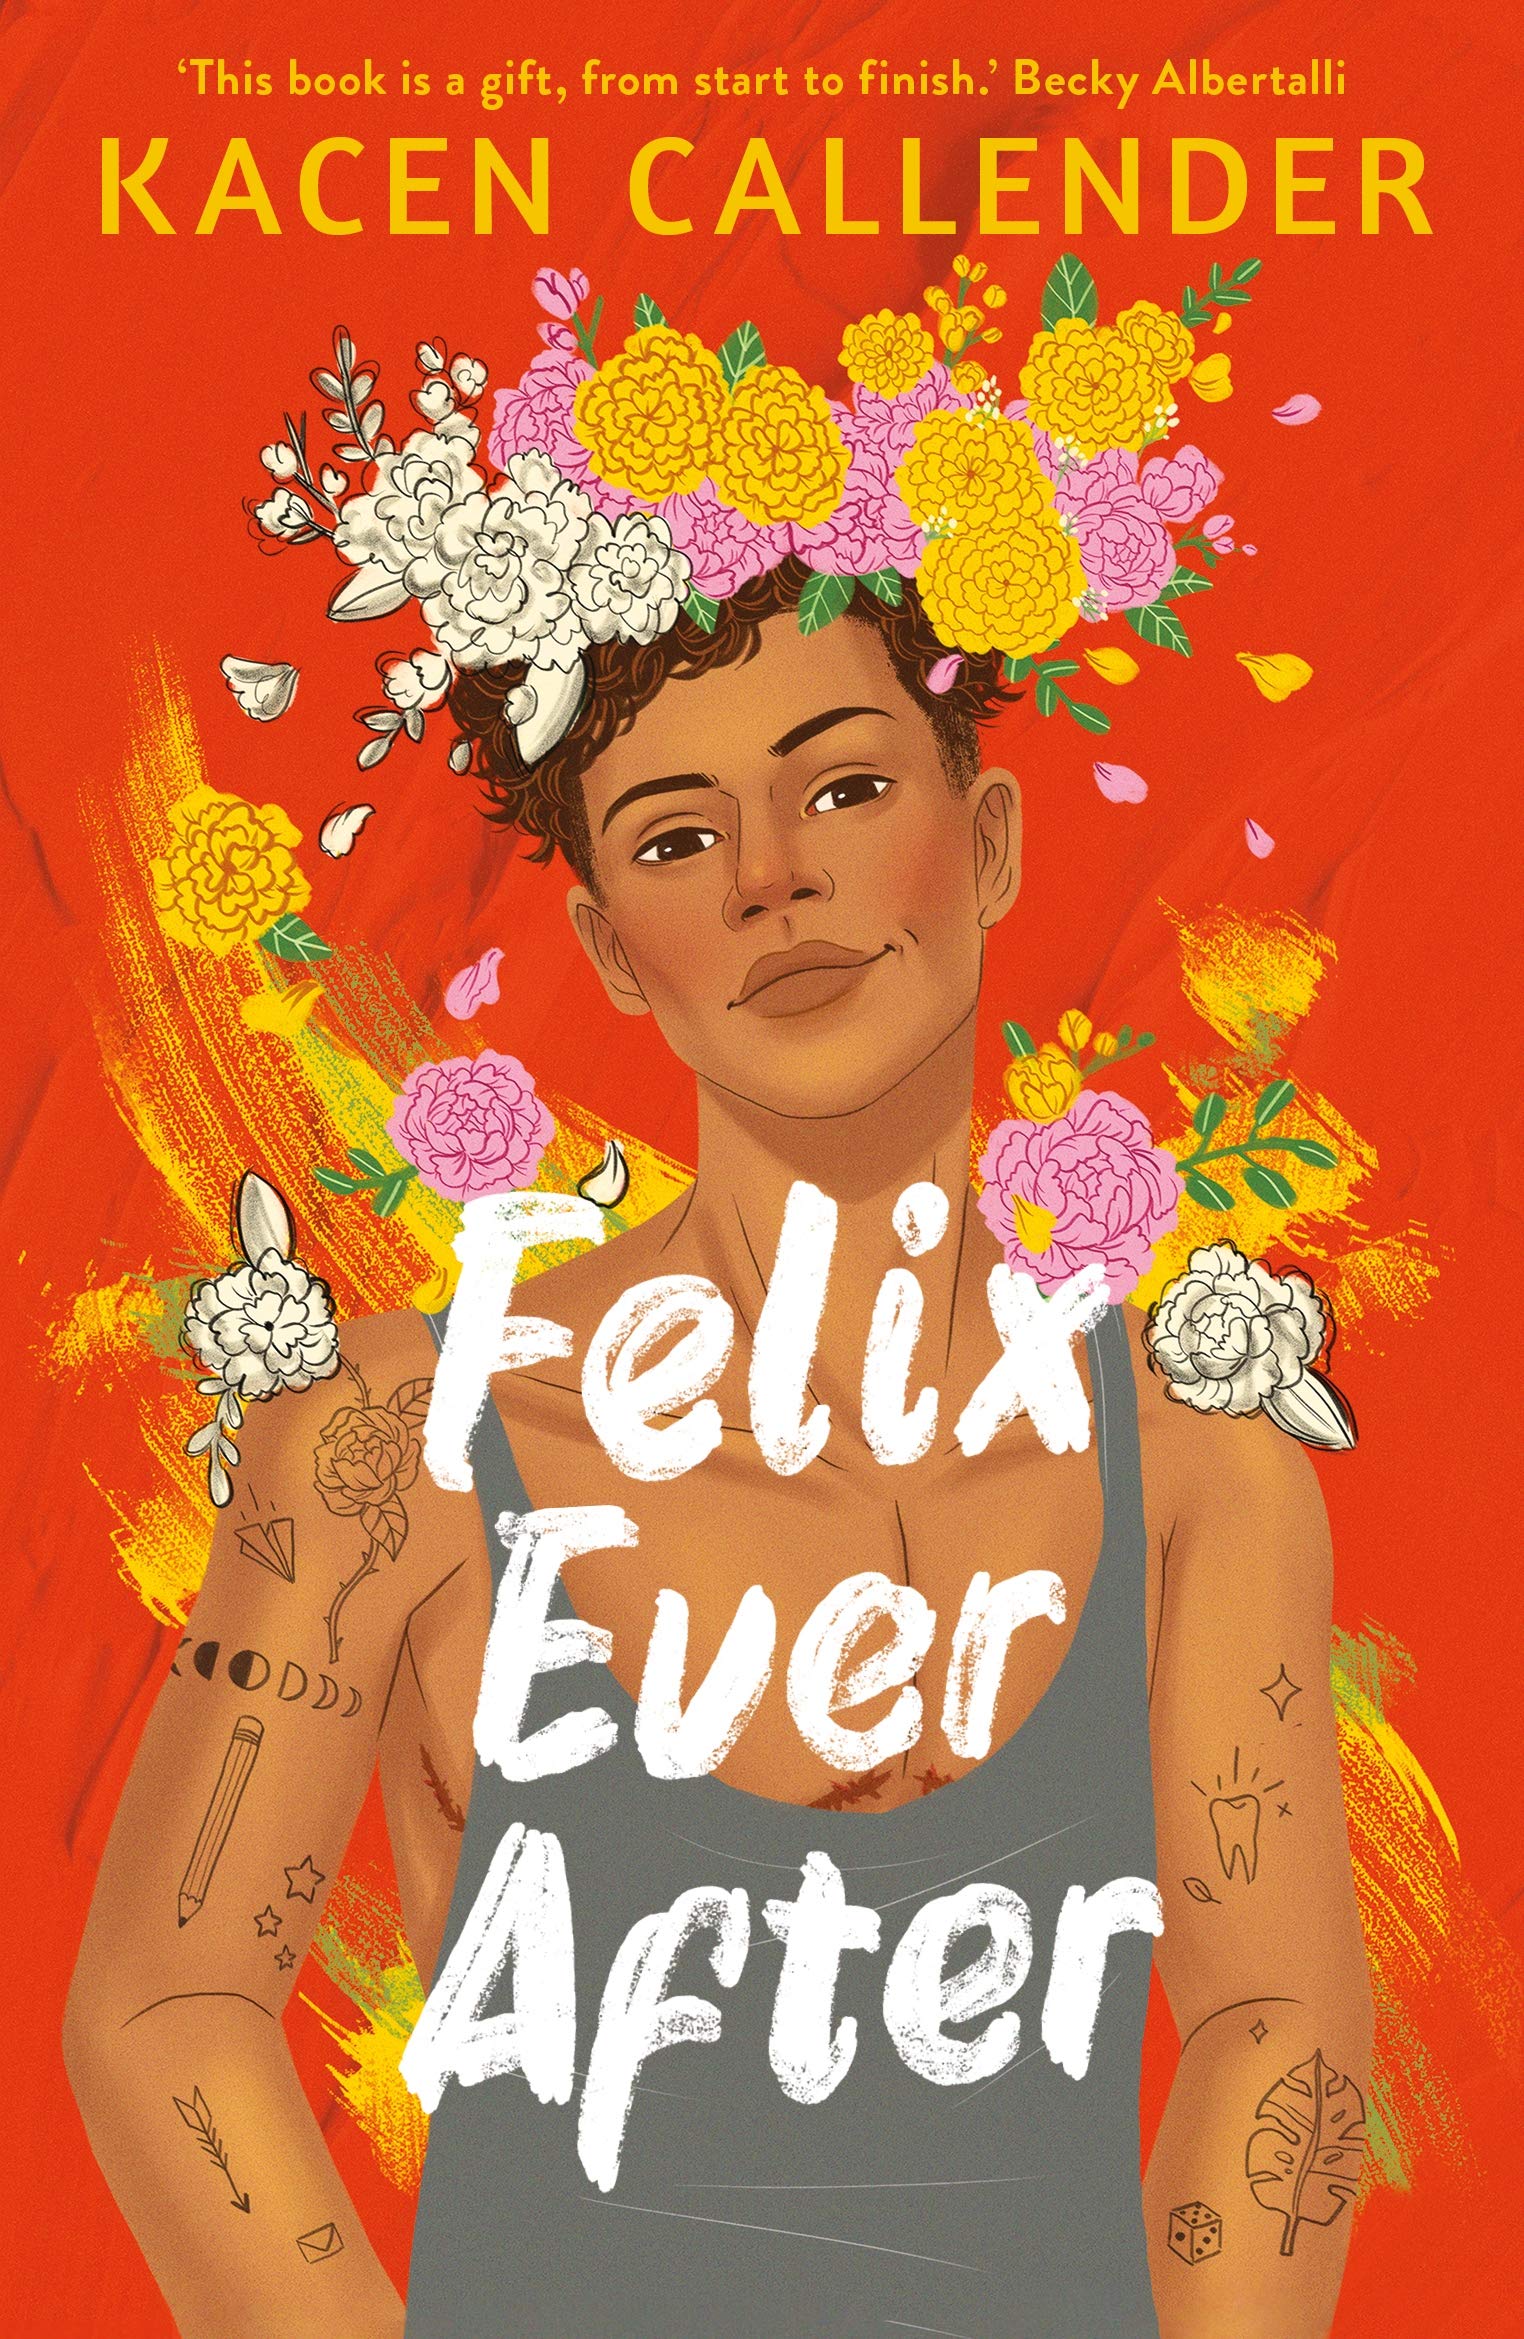 "Felix Ever After" by Kacen Callender. Add these six LGBTQ+ books to your reading list, for comfort, insight, empathy, and enjoyment, classics and newer releases. Feed your soul.